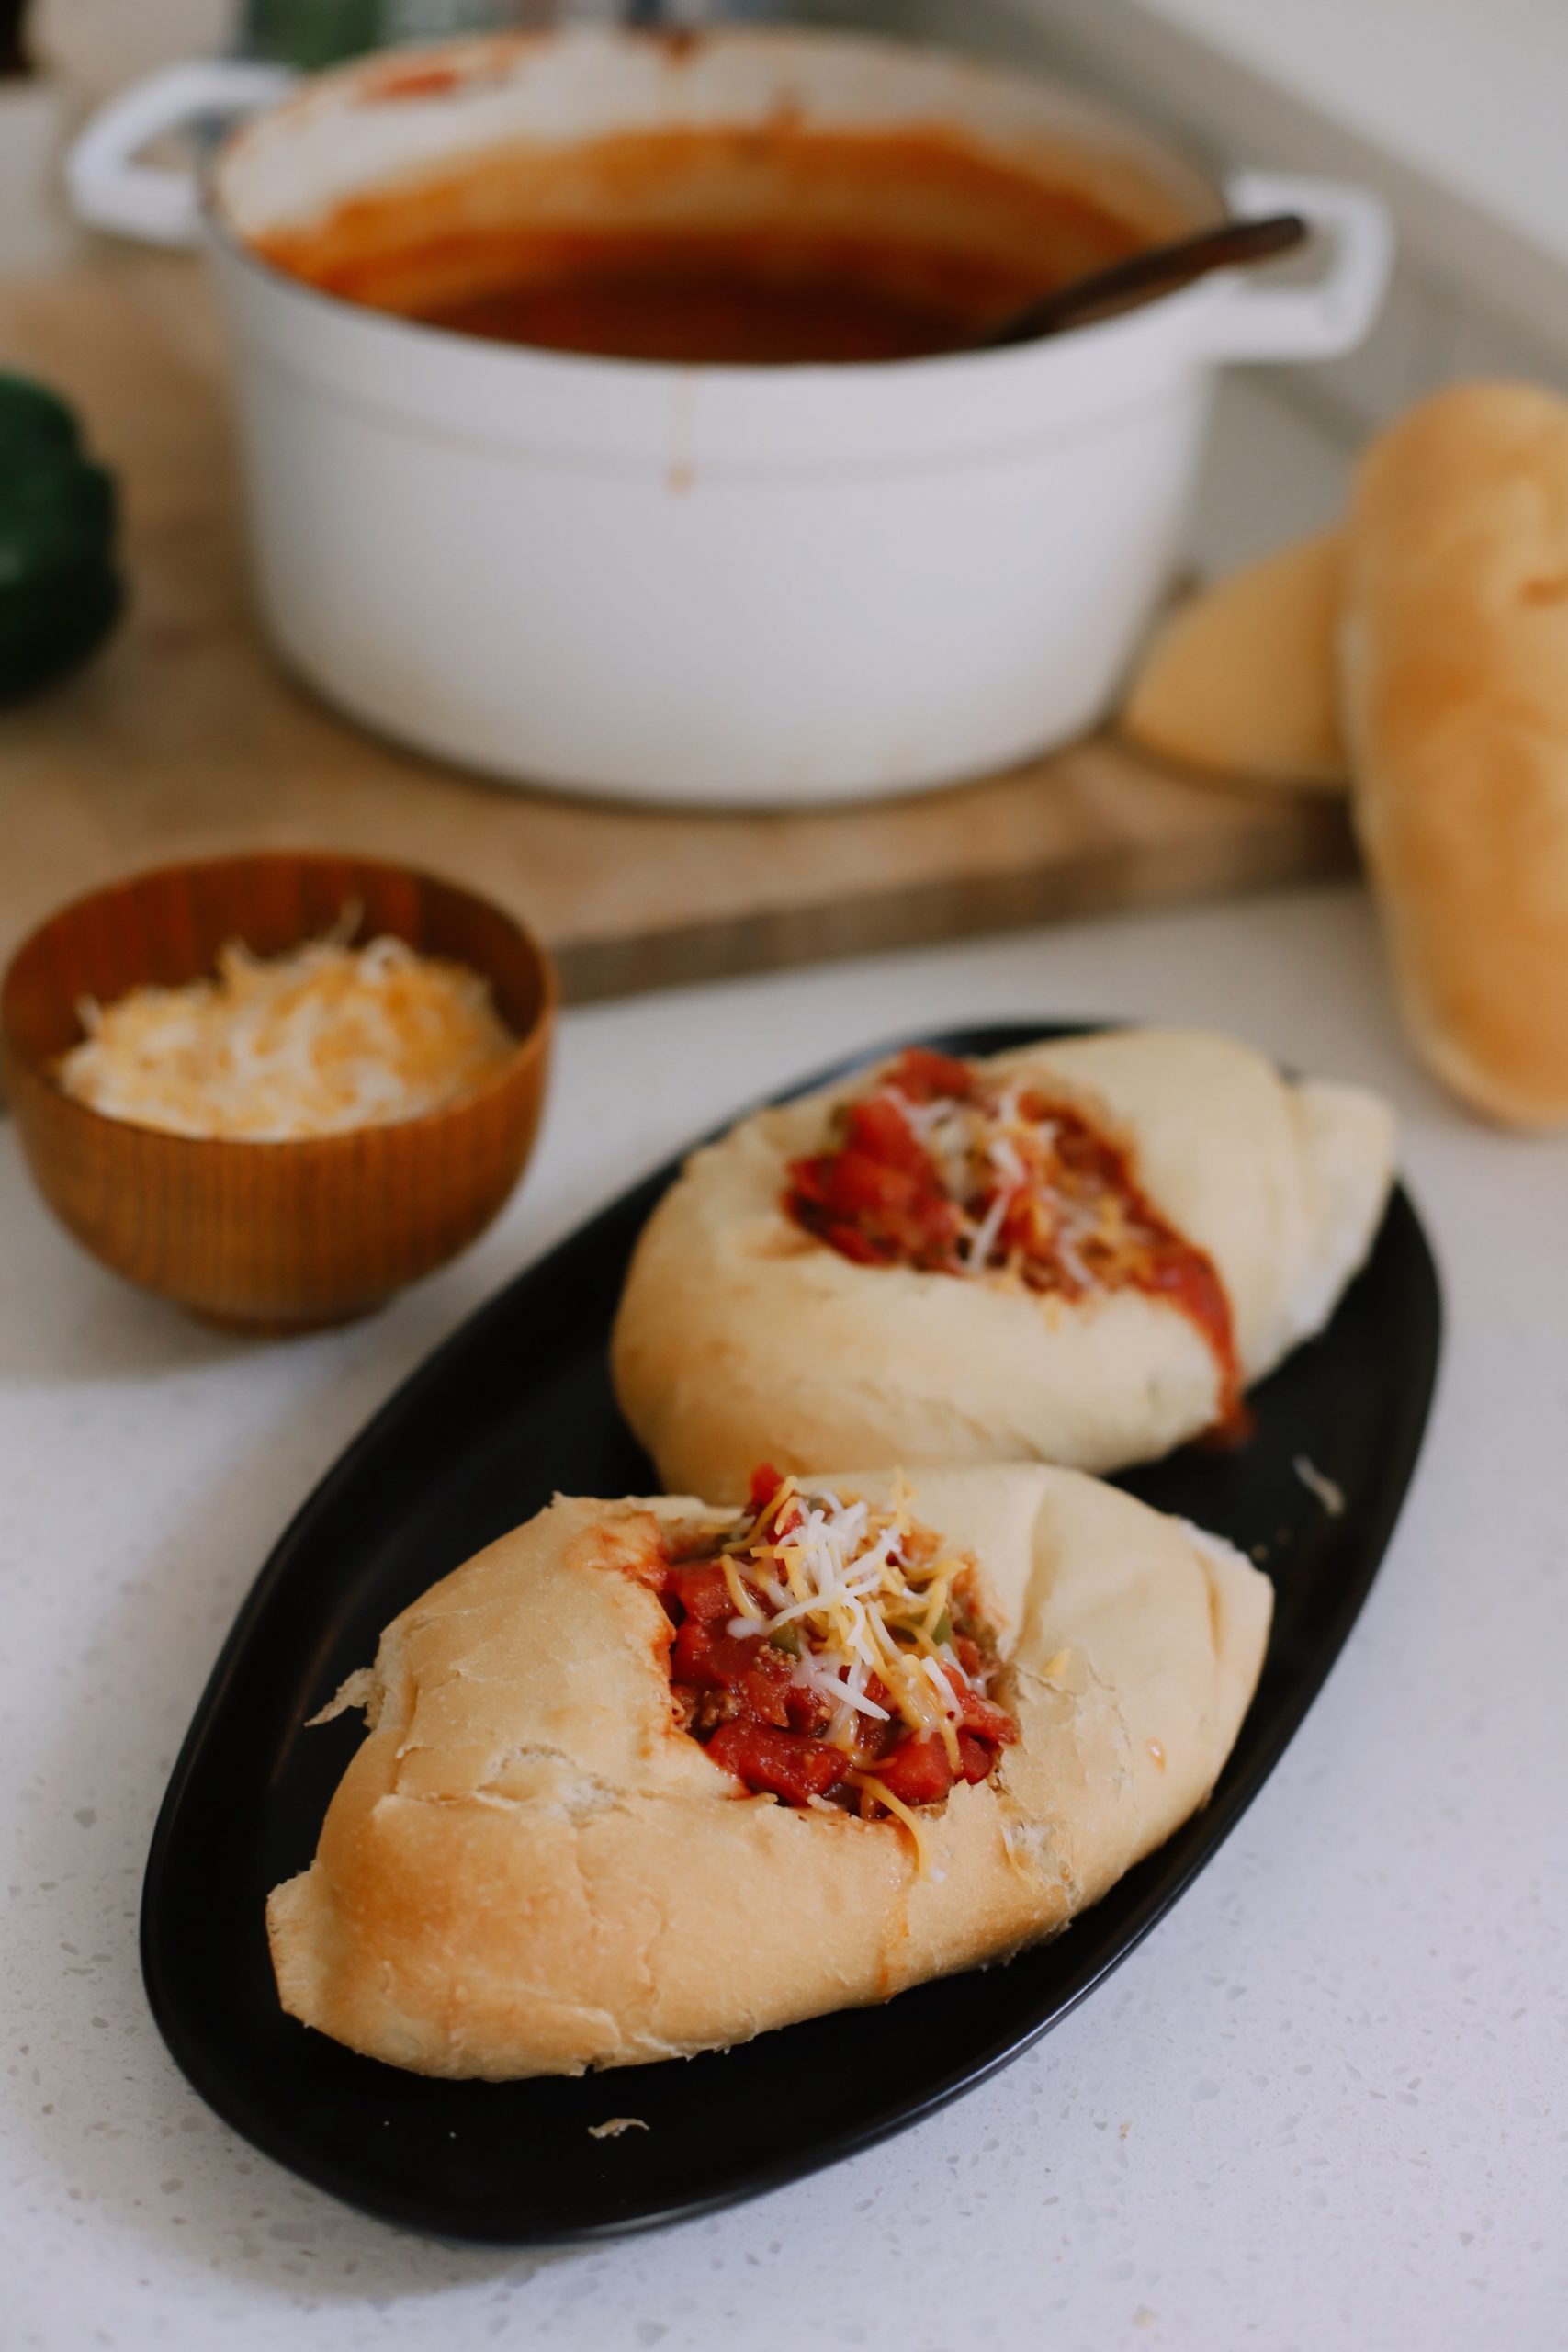 Easy Family Favorite Chili recipe! Make this delicious classic homemade chili in the crockpot or in one pot easily. It's THE BEST CHILI, and my family asks me to make it over and over. | Chili Recipe by popular Florida lifestyle blog, Fresh Mommy Blog: image of chili in bread bowls. 